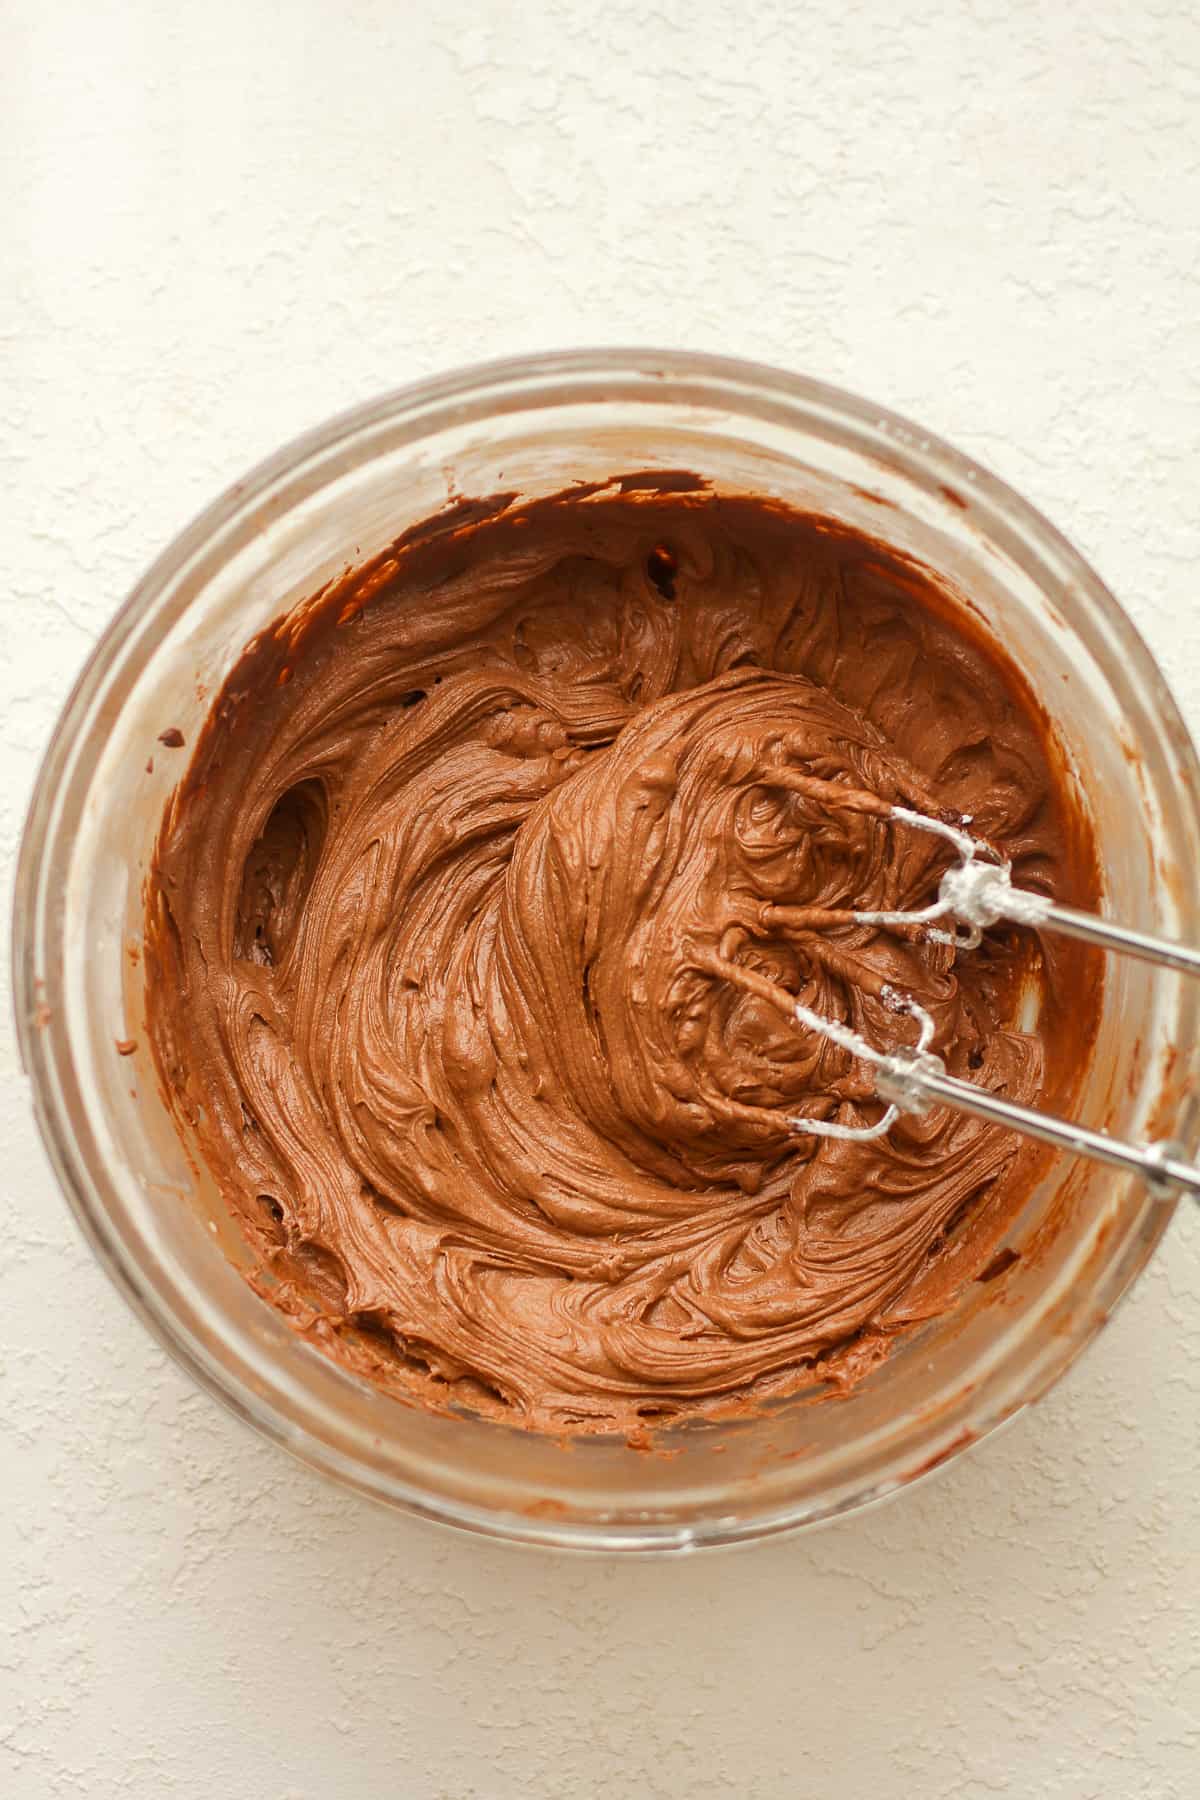 A bowl of chocolate frosting.